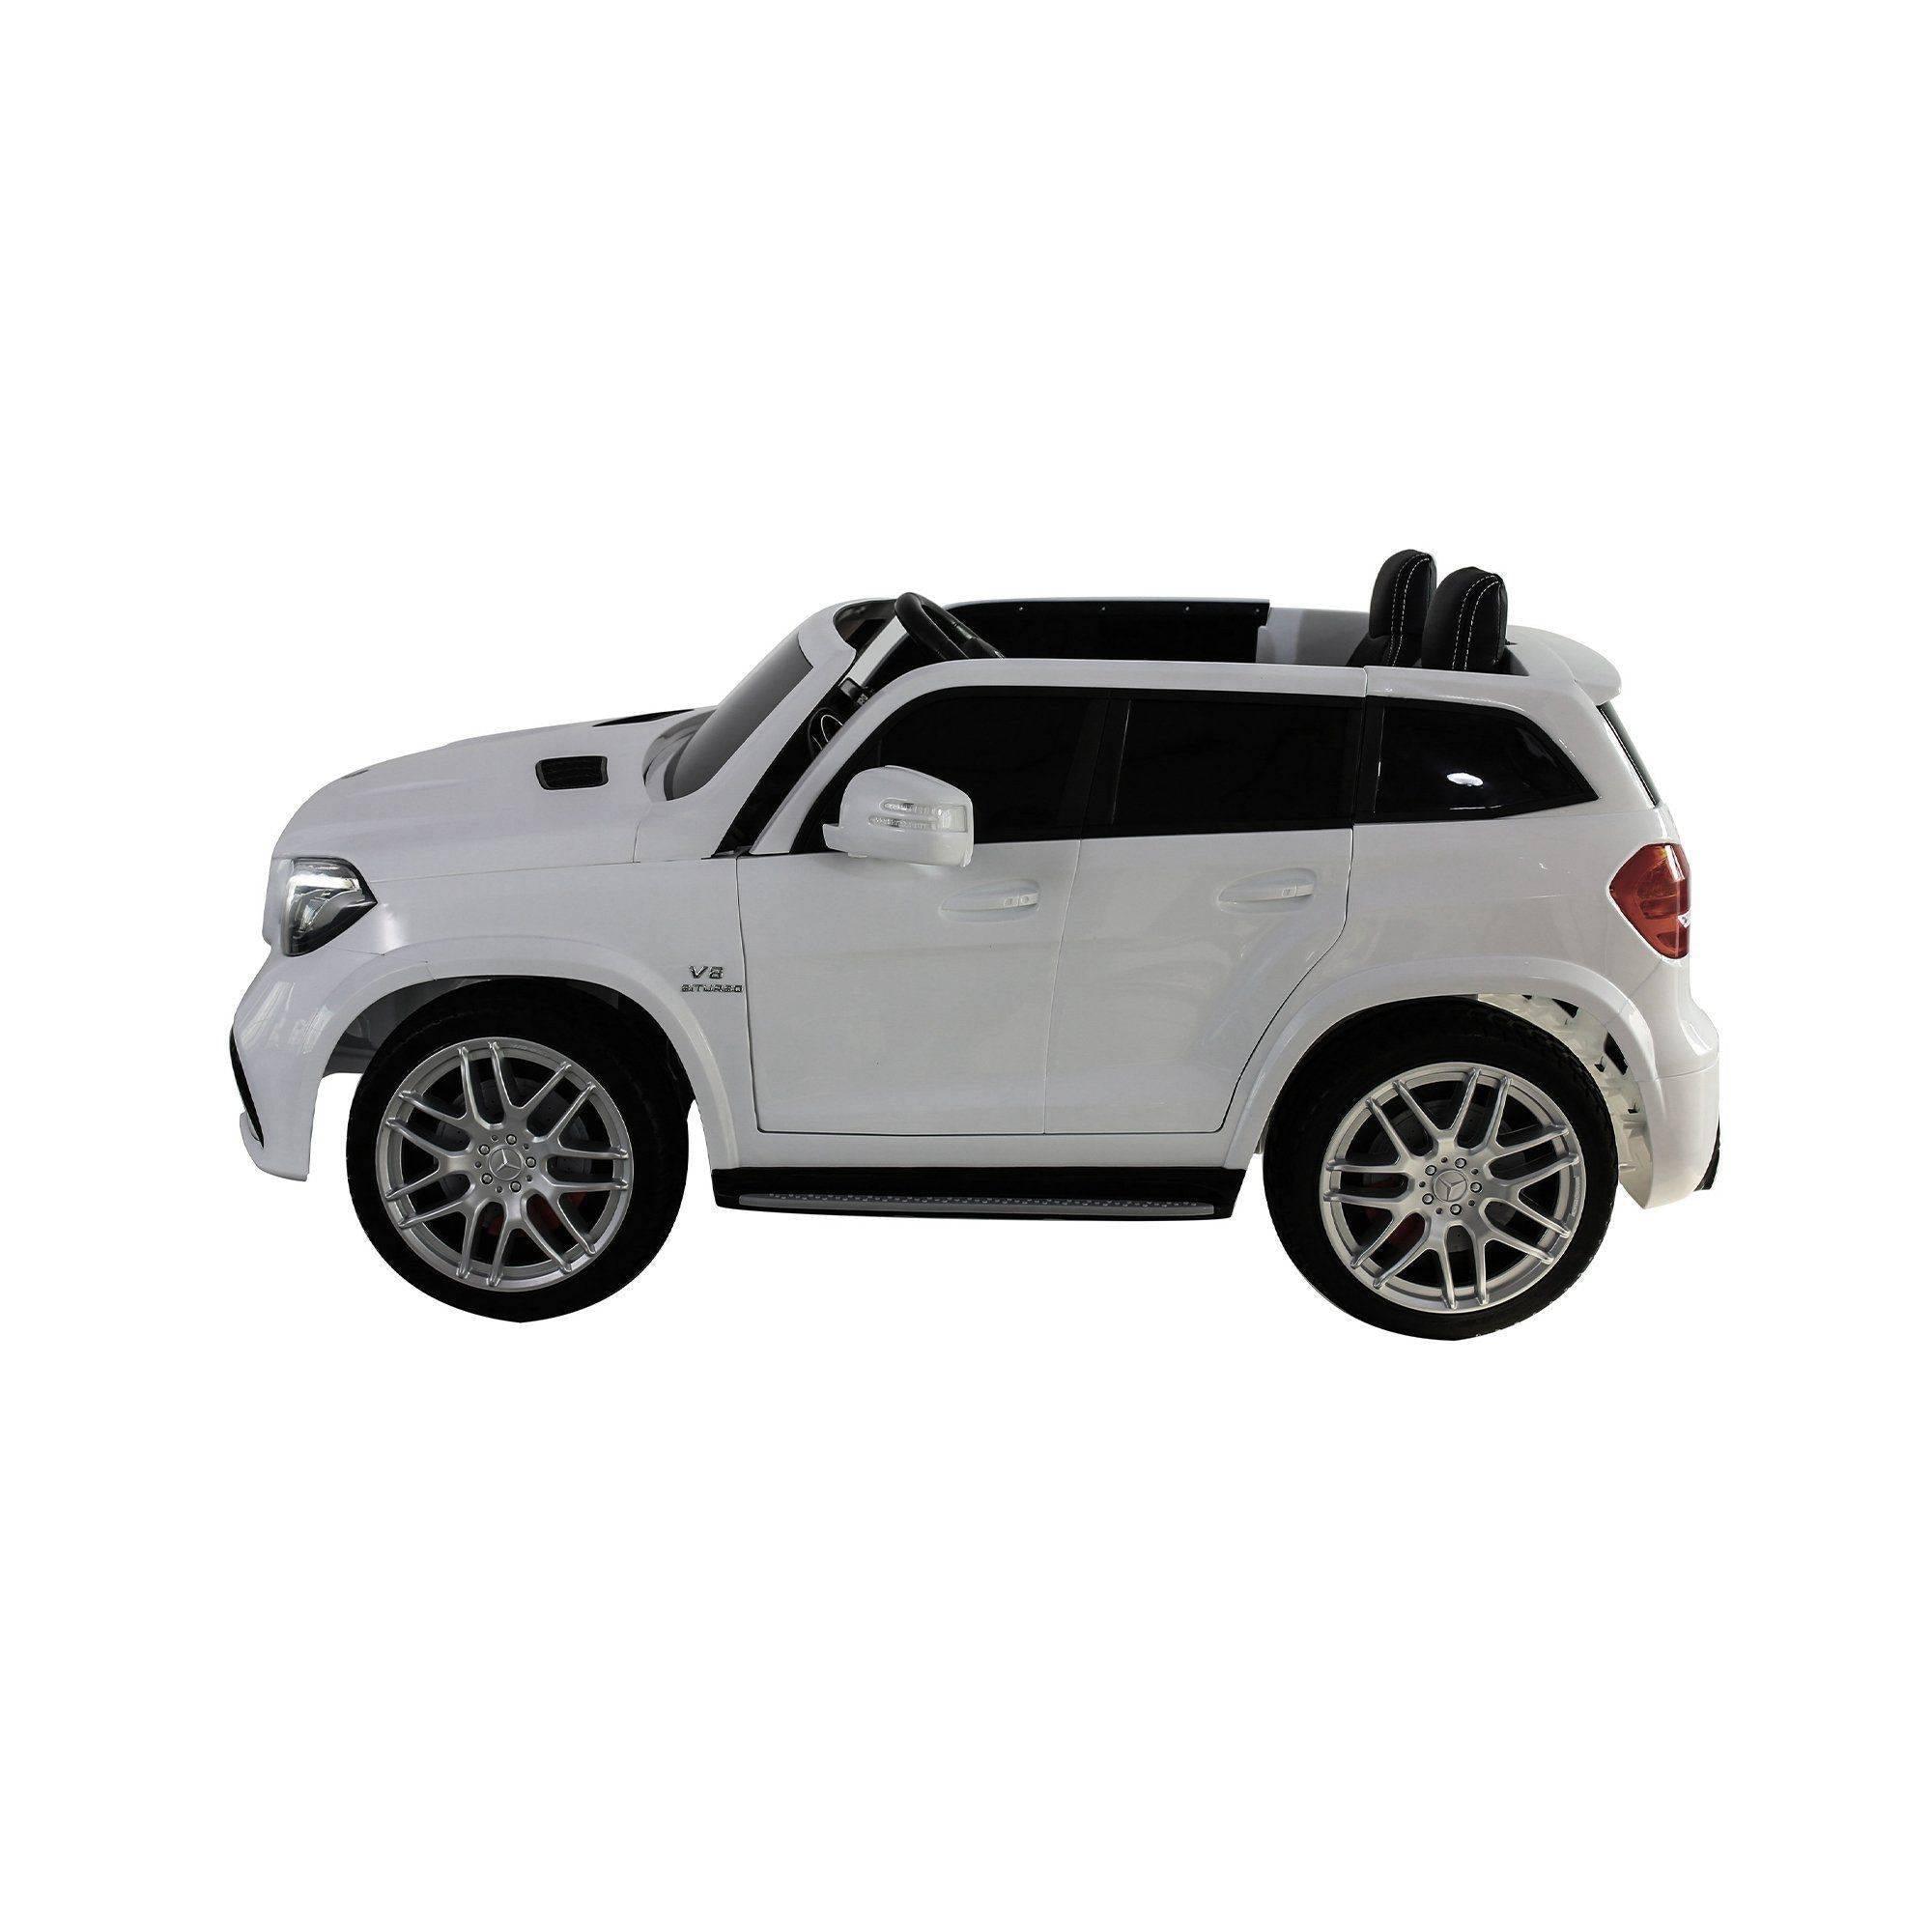 Licensed Mercedes Benz GLS63 12V Battery Operated 2 Seater Ride On Car With Parental Remote by Freddo - American Kids Cars